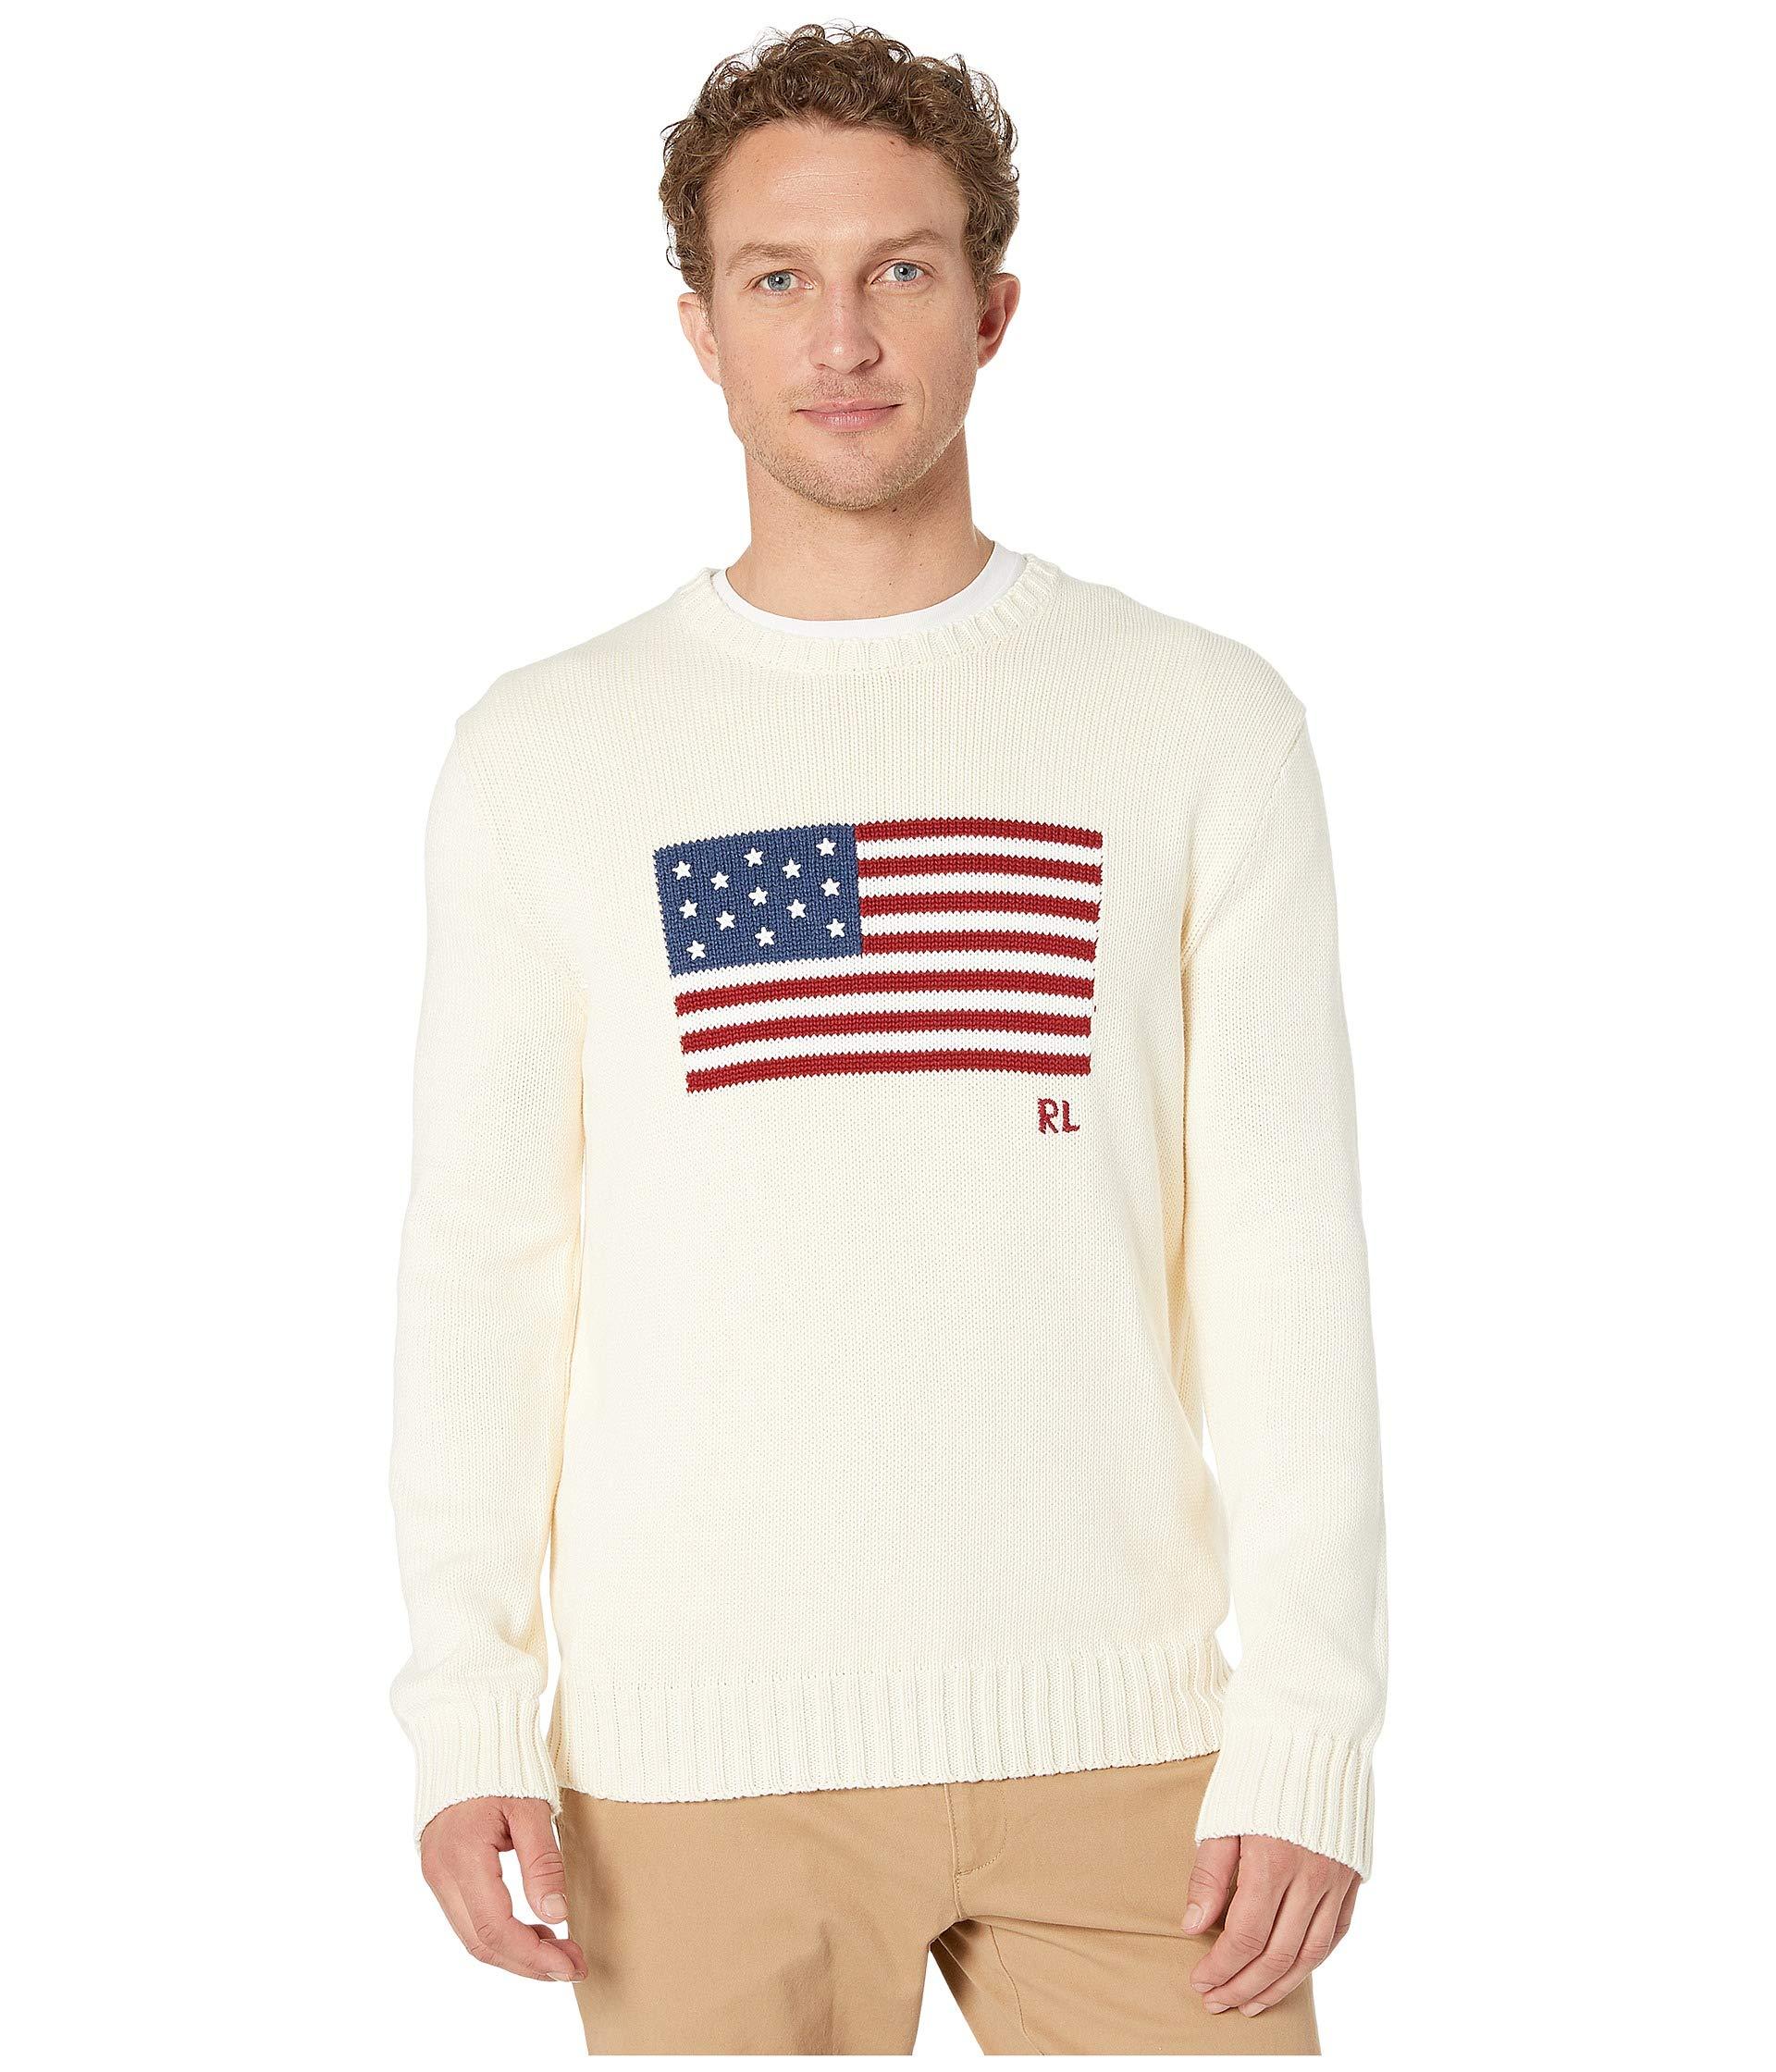 Polo Ralph Lauren Cotton Ralph Lauren The Iconic Flag Sweater in Navy  (Blue) for Men - Save 67% - Lyst